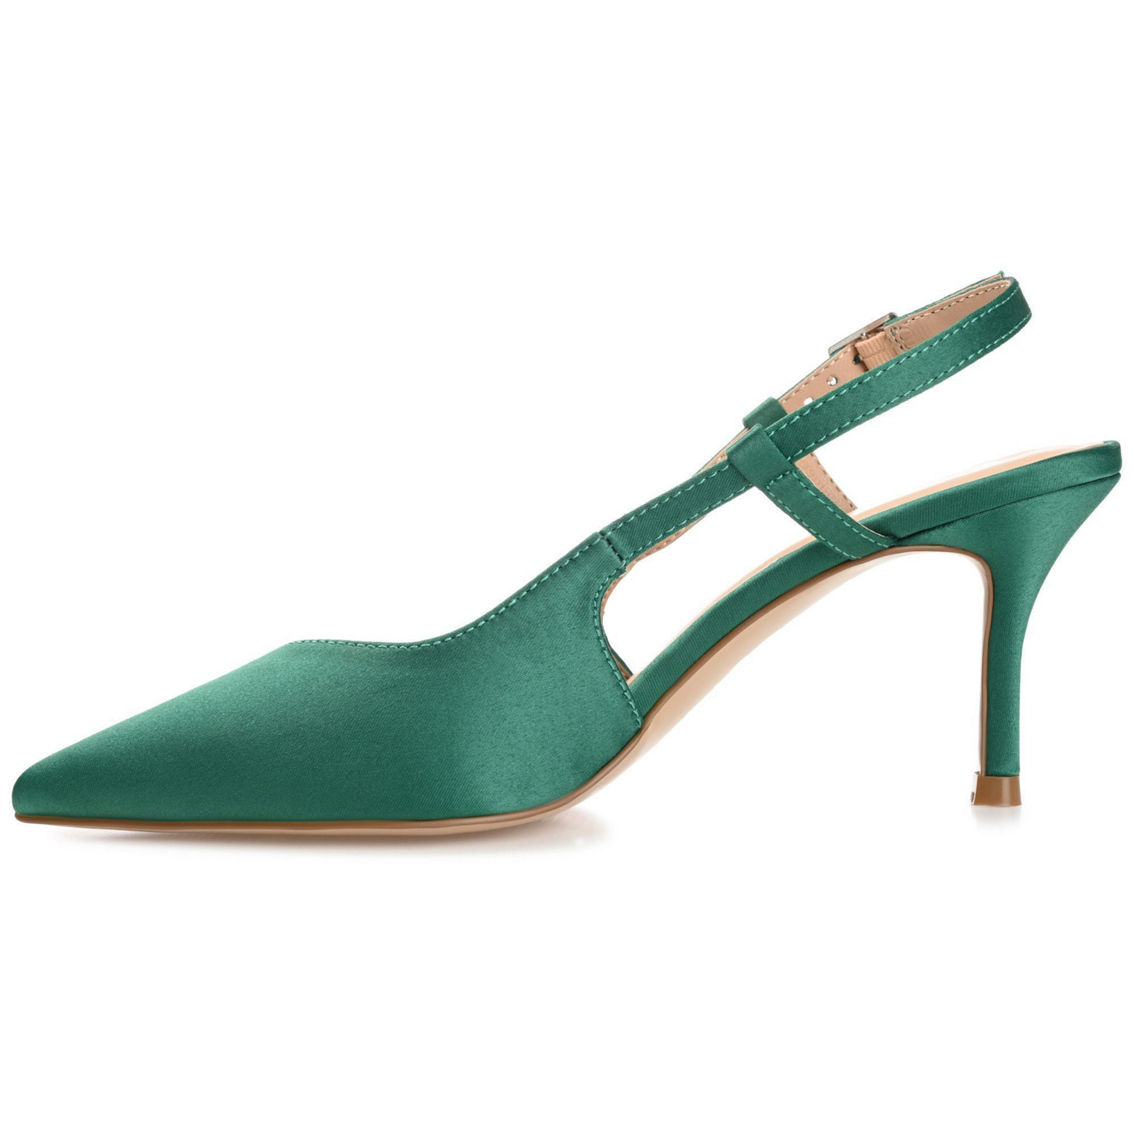 Journee Collection Women's Knightly Medium and Wide Width Pump - Image 4 of 5